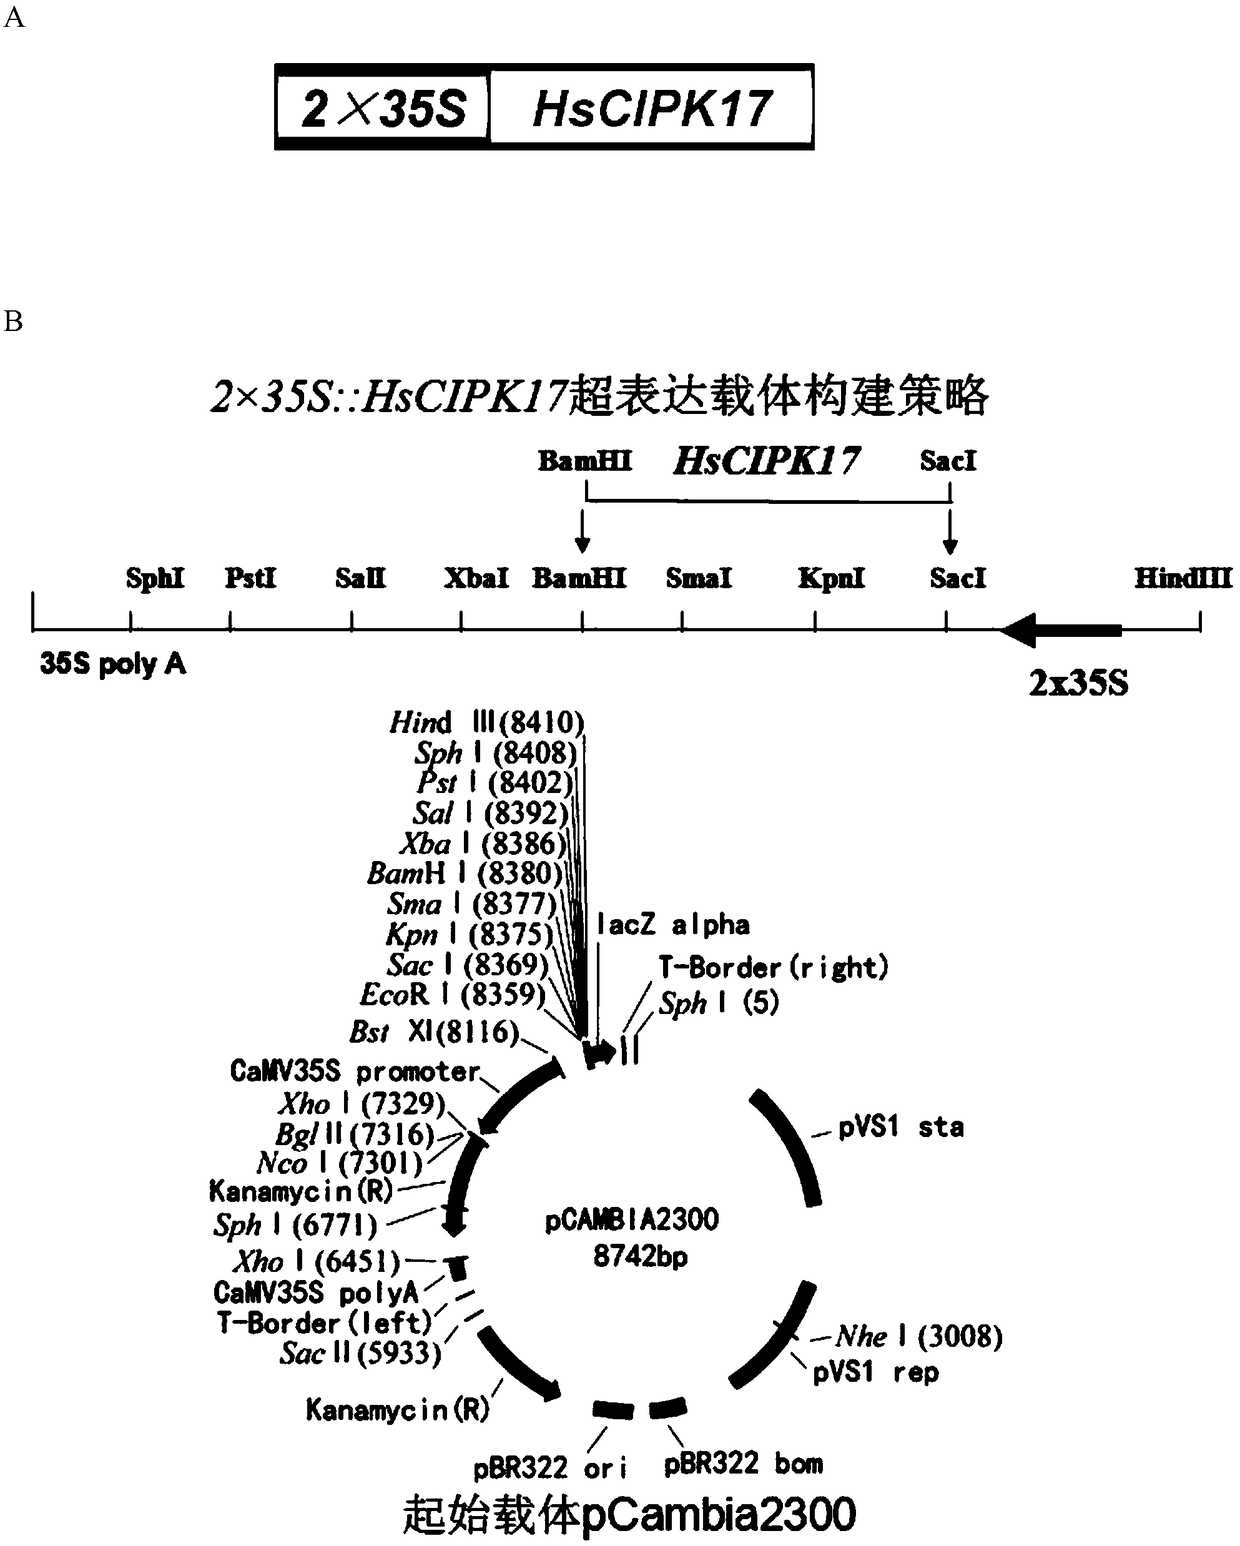 Application of HsCIPK17 of Hordeum spontaneum C. Koch in Qinghai Tibet Plateau to improvement in rice resistance to abiotic stress